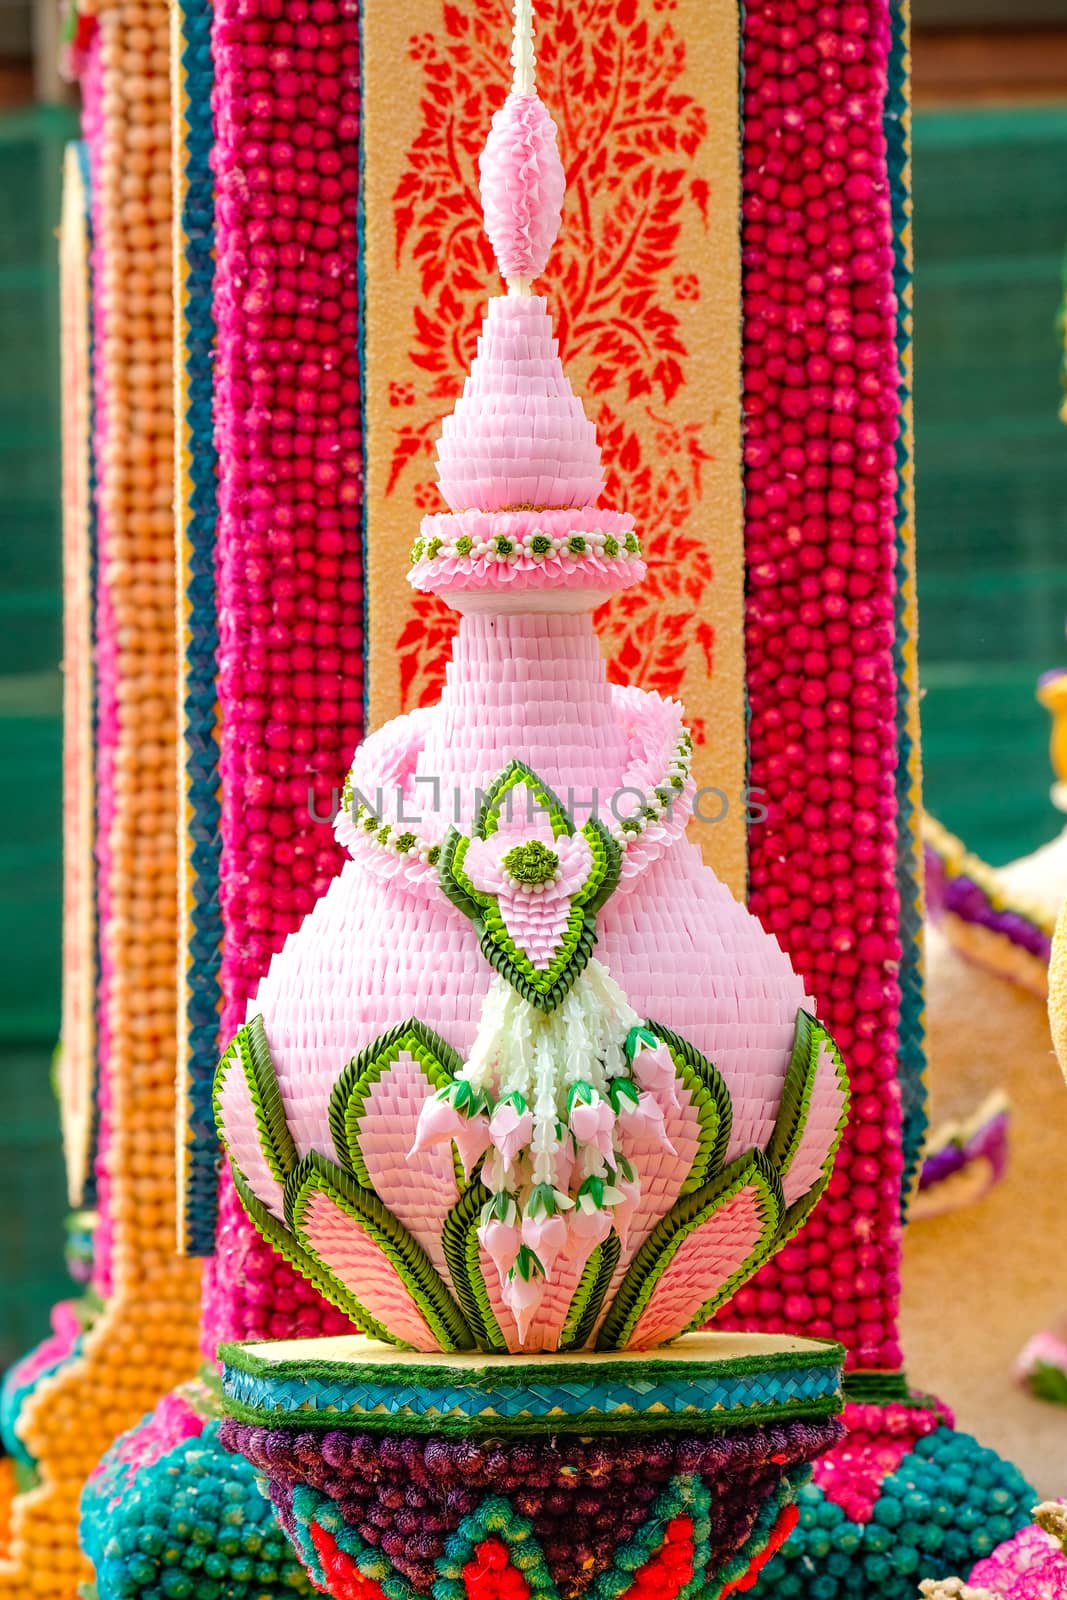 Details of elaborated fresh and dried flowers pattern on a floral float, annual Chiang mai Flower Festival, 2018, Thailand